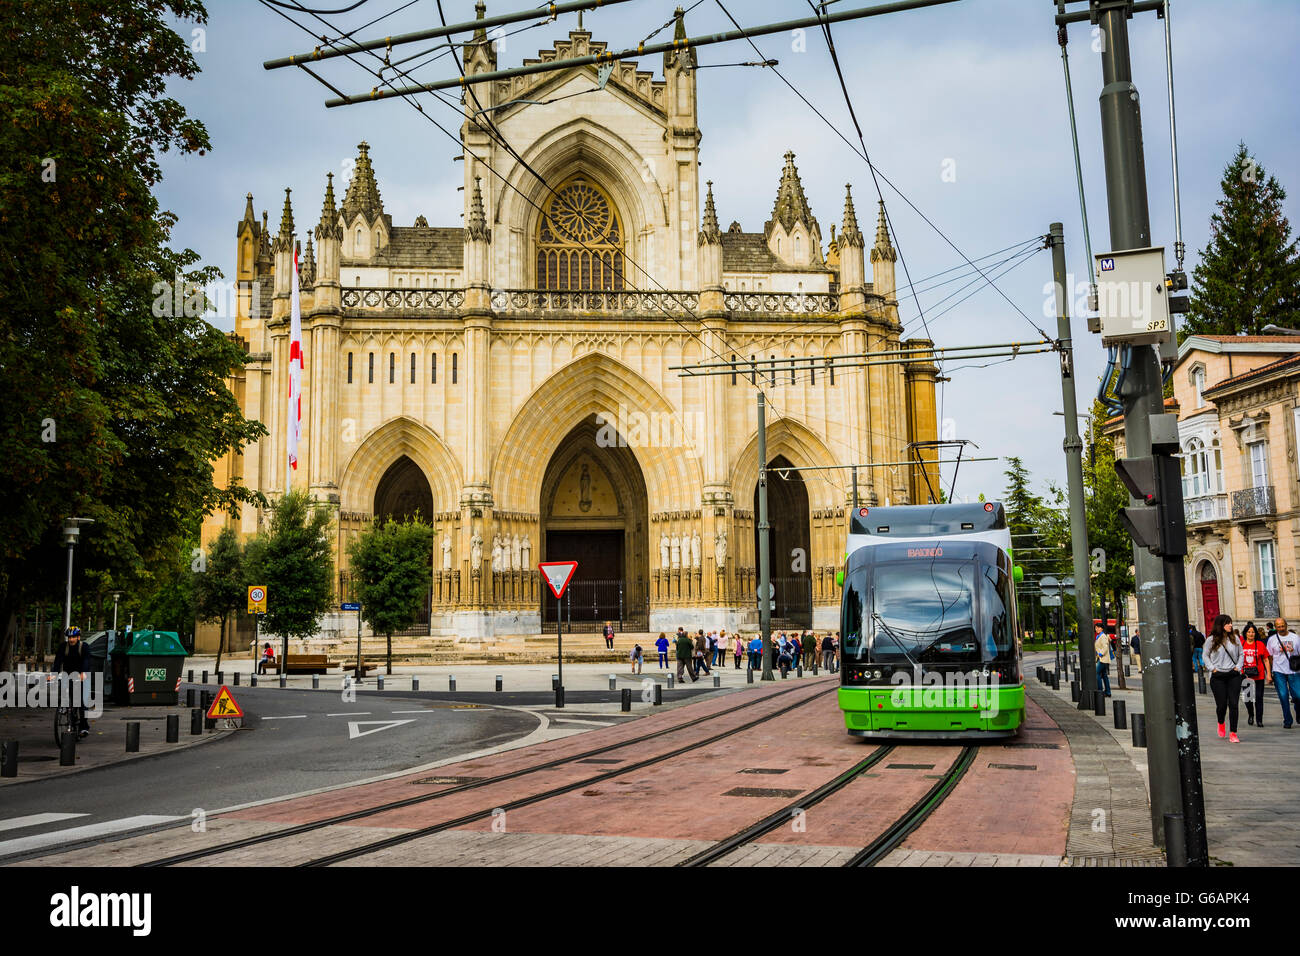 Cathedral of Mary Immaculate, New Cathedral, and tram. Vitoria-Gasteiz, Álava, Basque Country, Spain, Europe Stock Photo